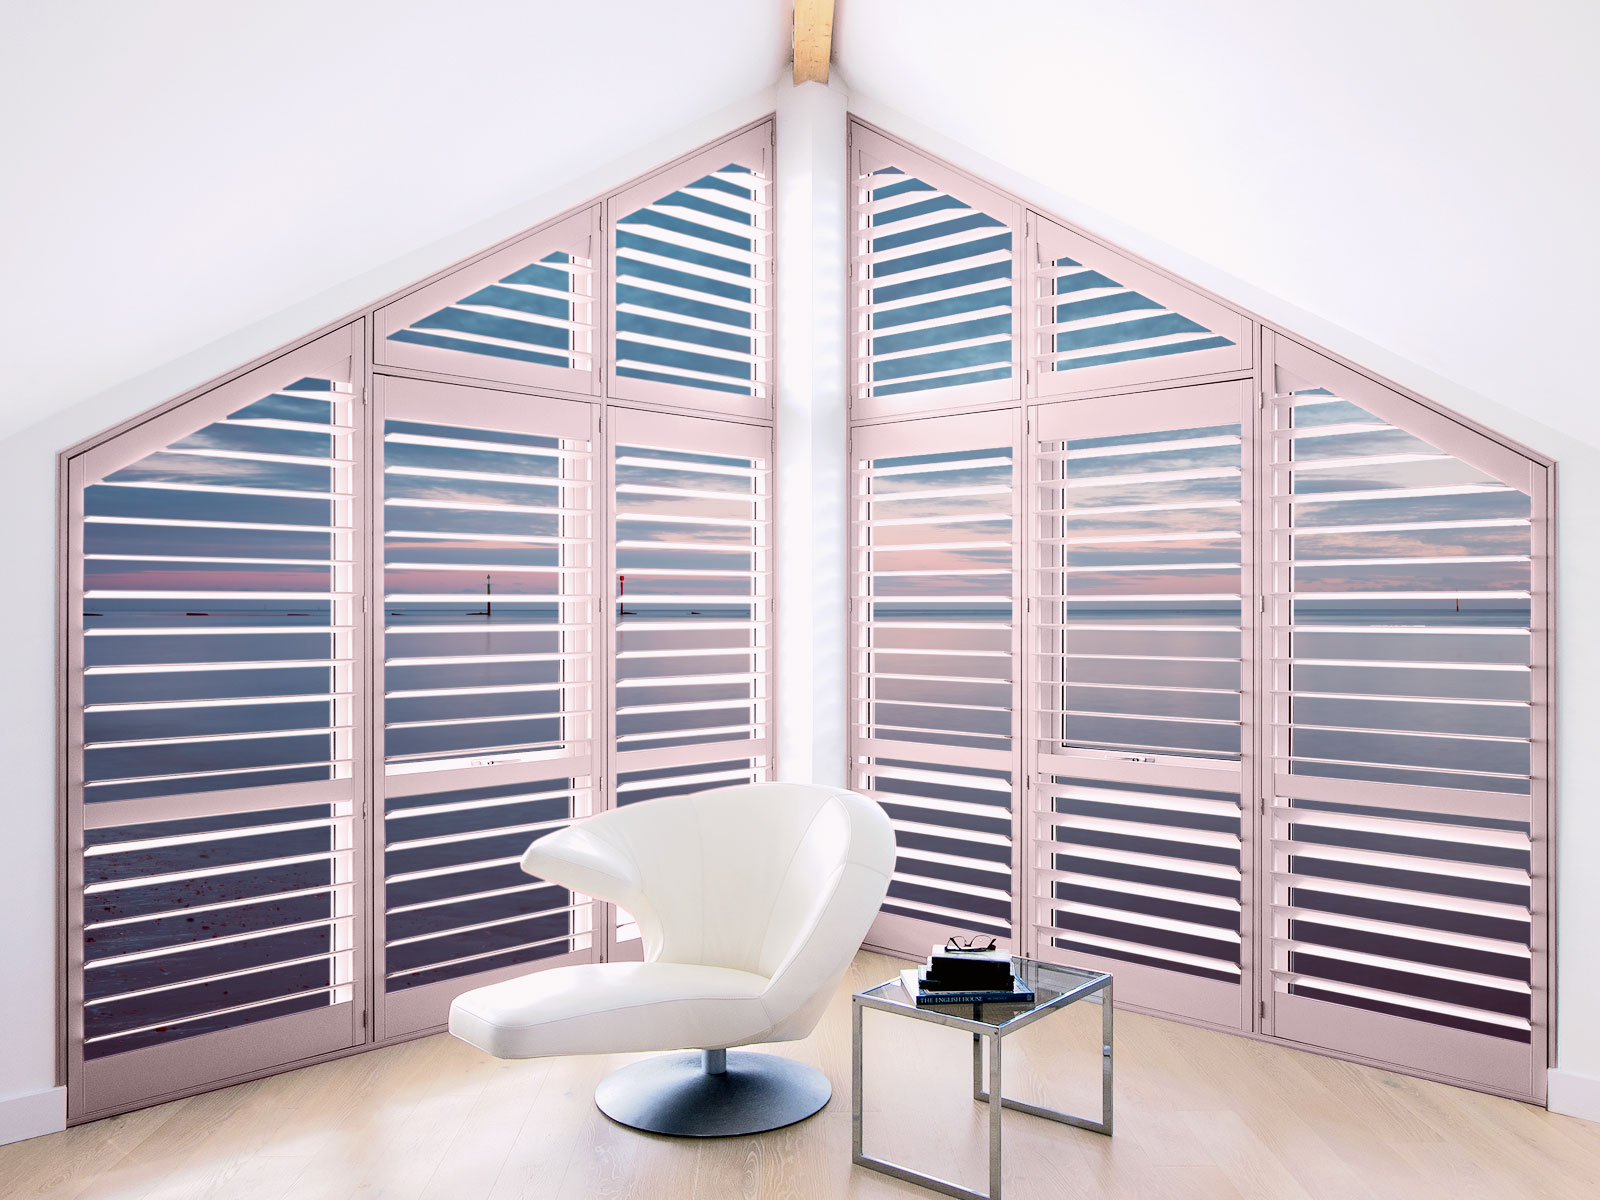 Coral shutters